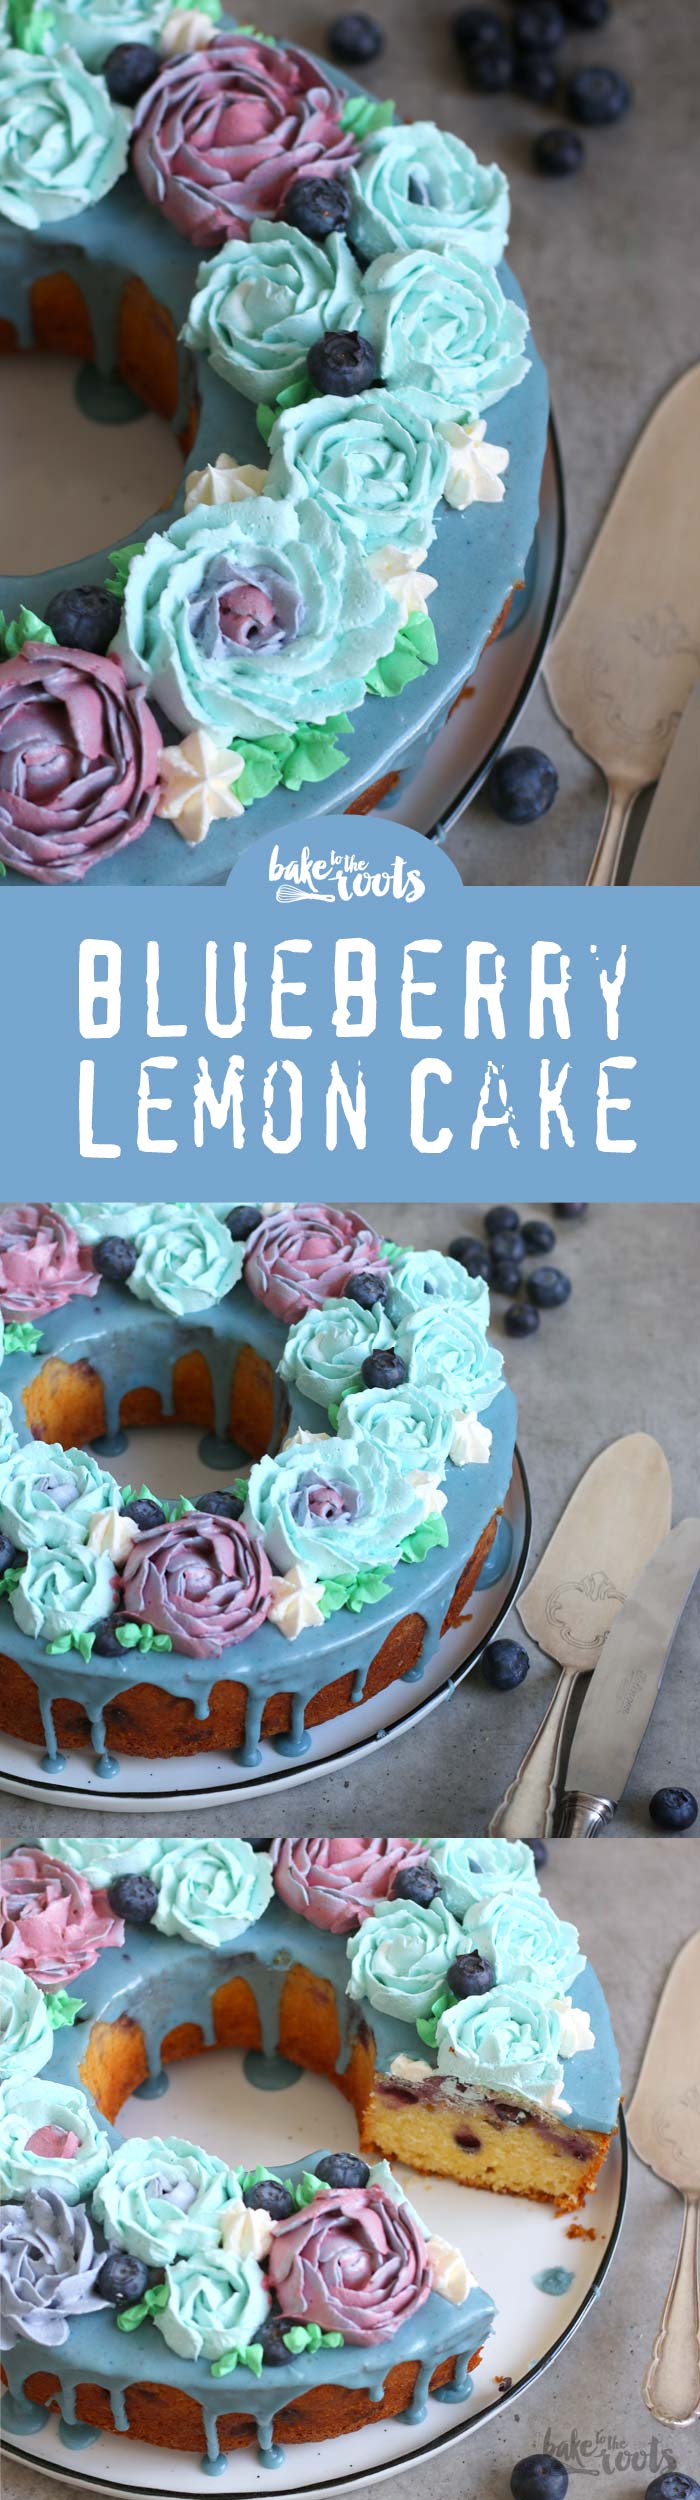 Delicious cake with lemon and blueberry, topped with a nice amount of buttercream flowers - really easy to make | Bake to the roots